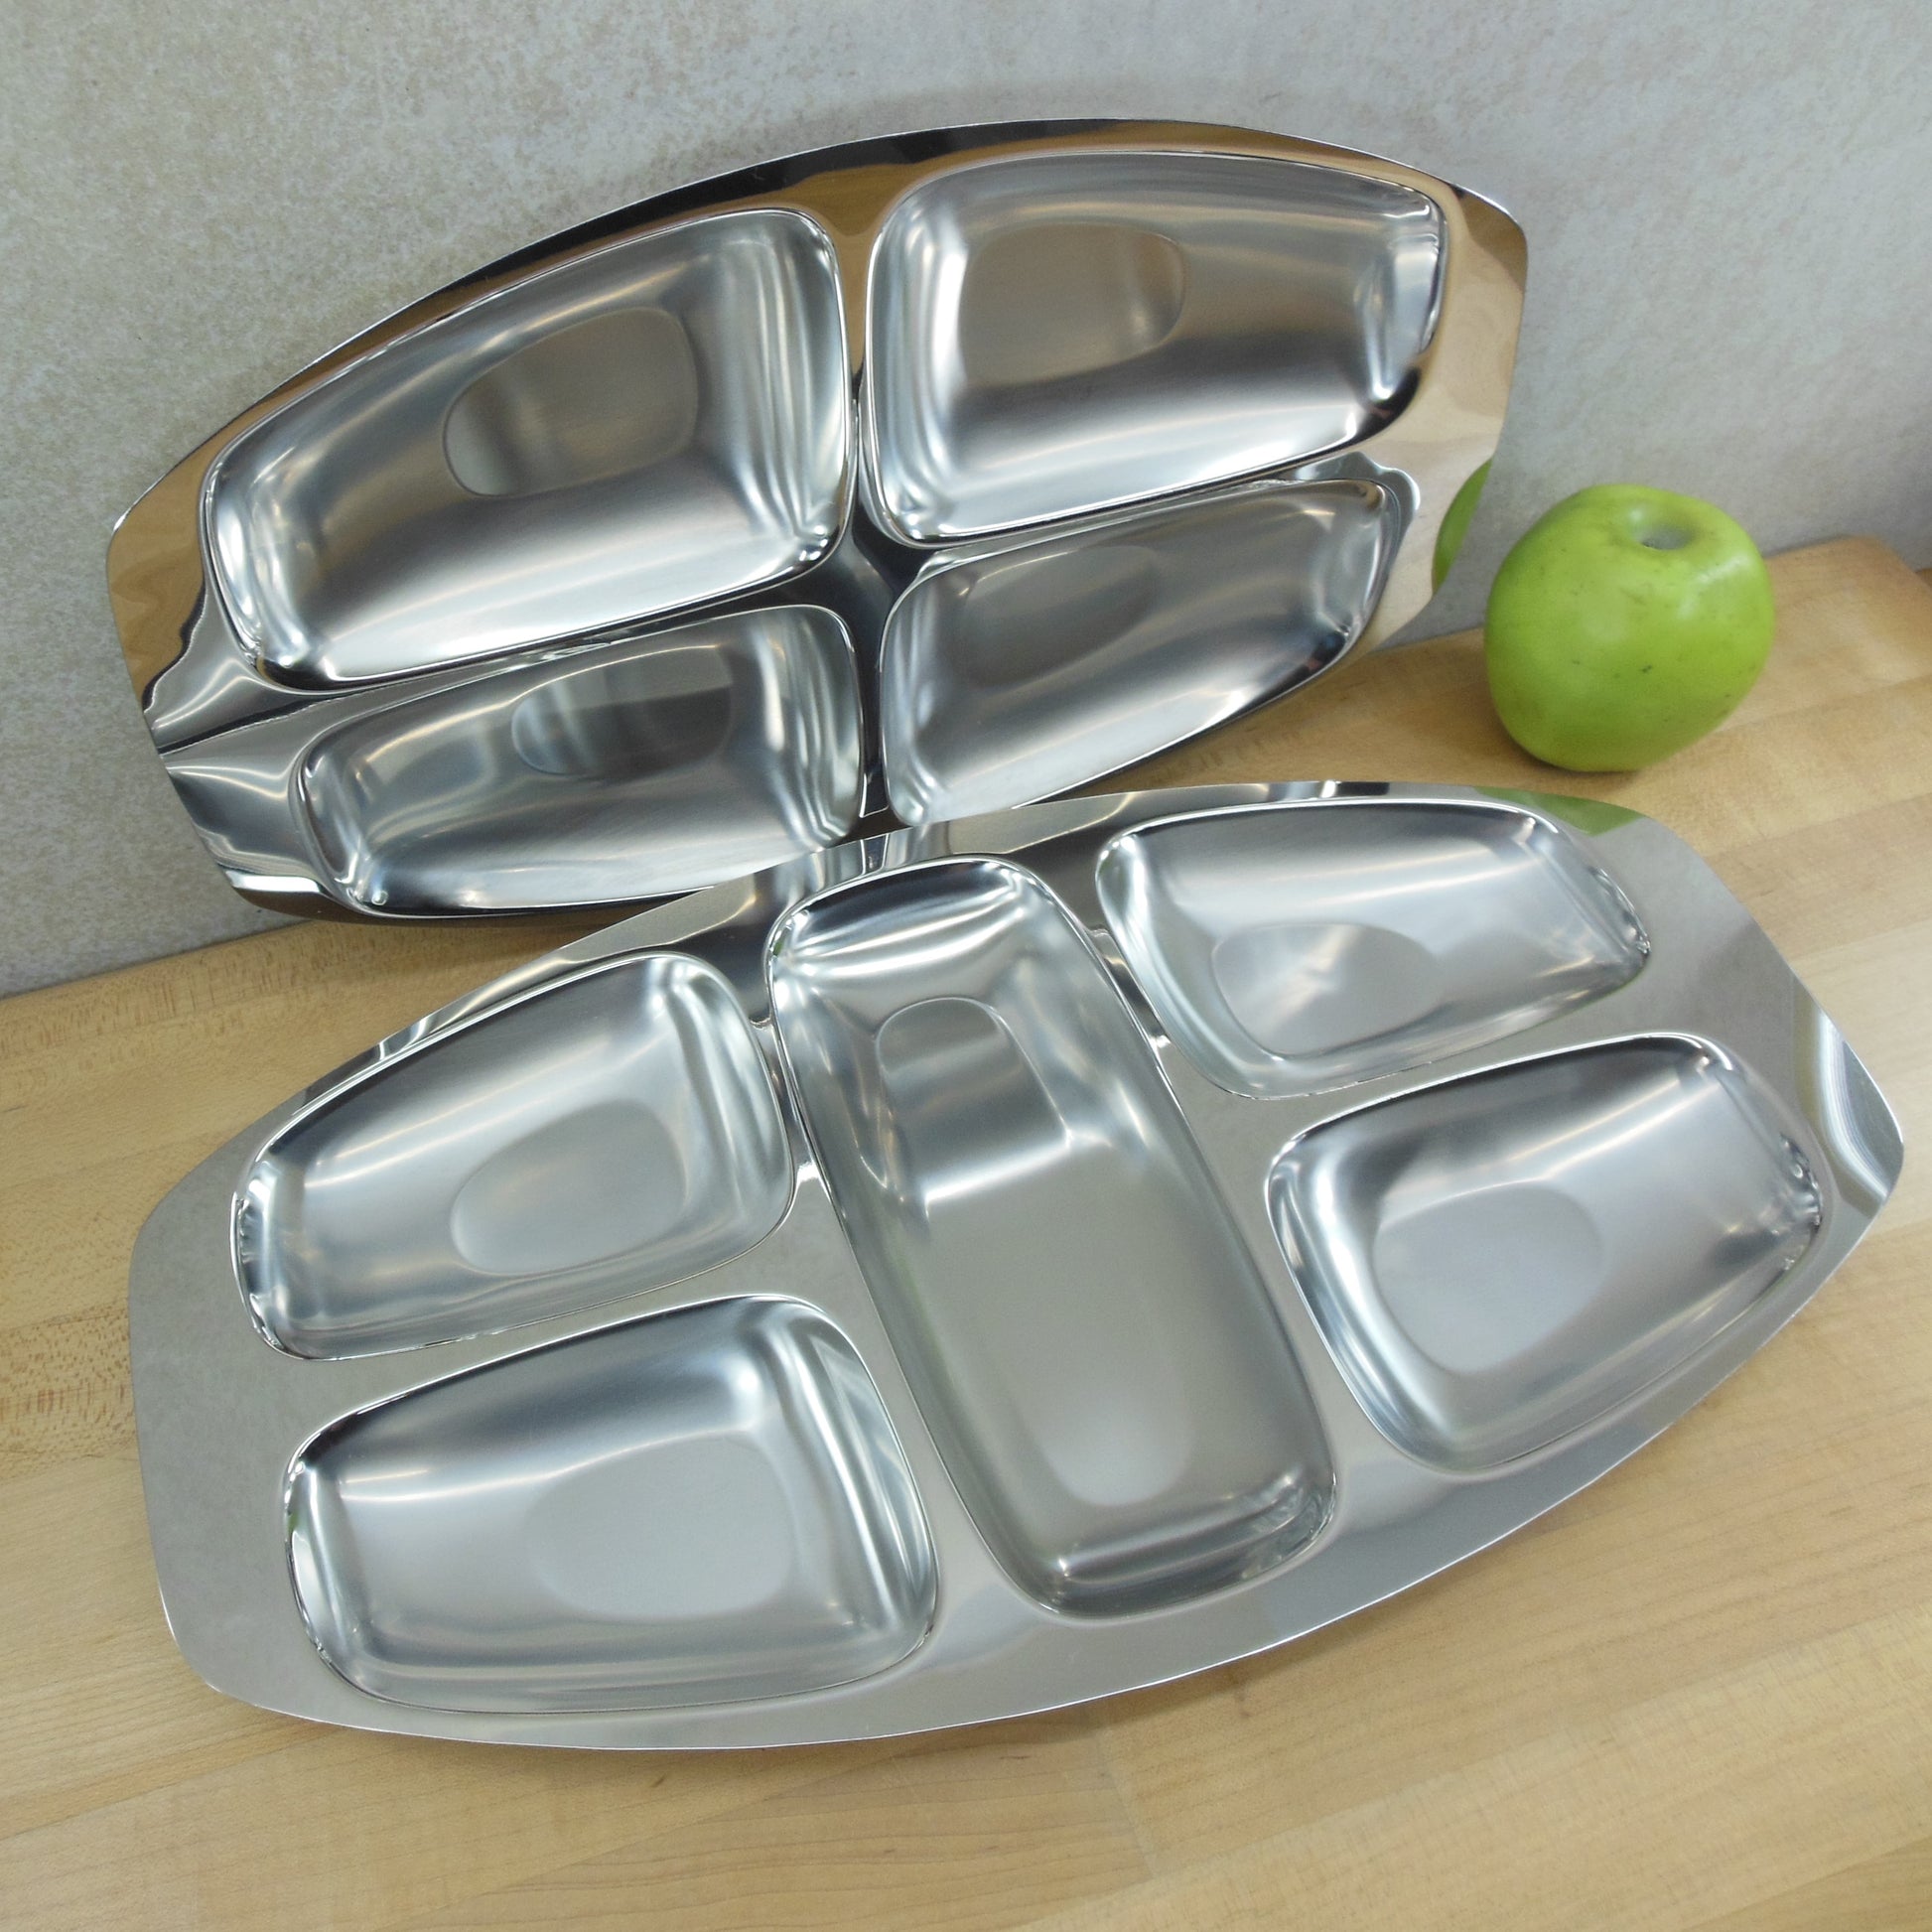 Alessi Italy Inox 18-10 Stainless Divided Serving Trays 4 & 5 Compartment Used